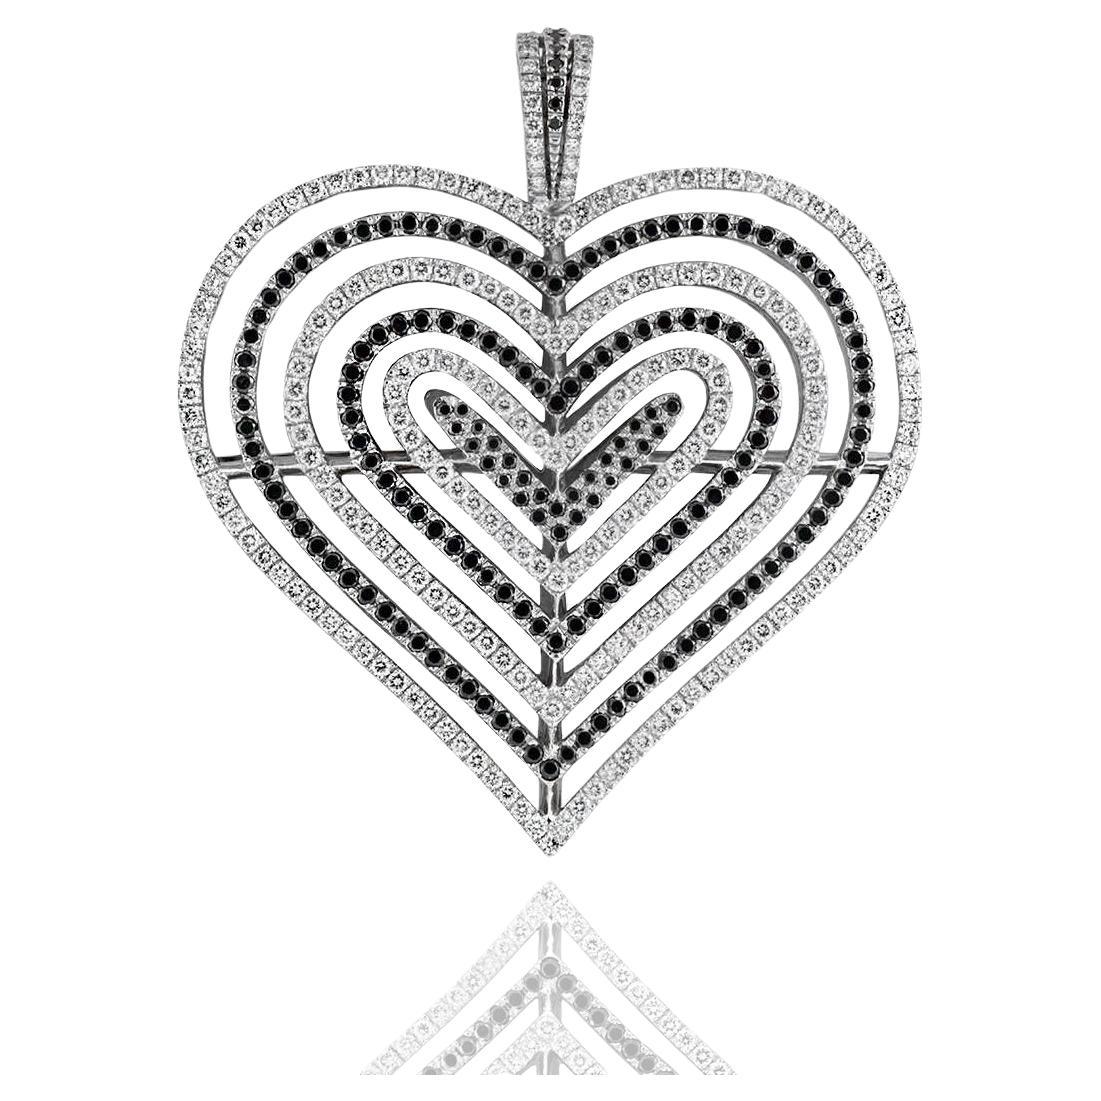 Theo Fennell Black and White Diamond Heart Pendant 2.62 Carat